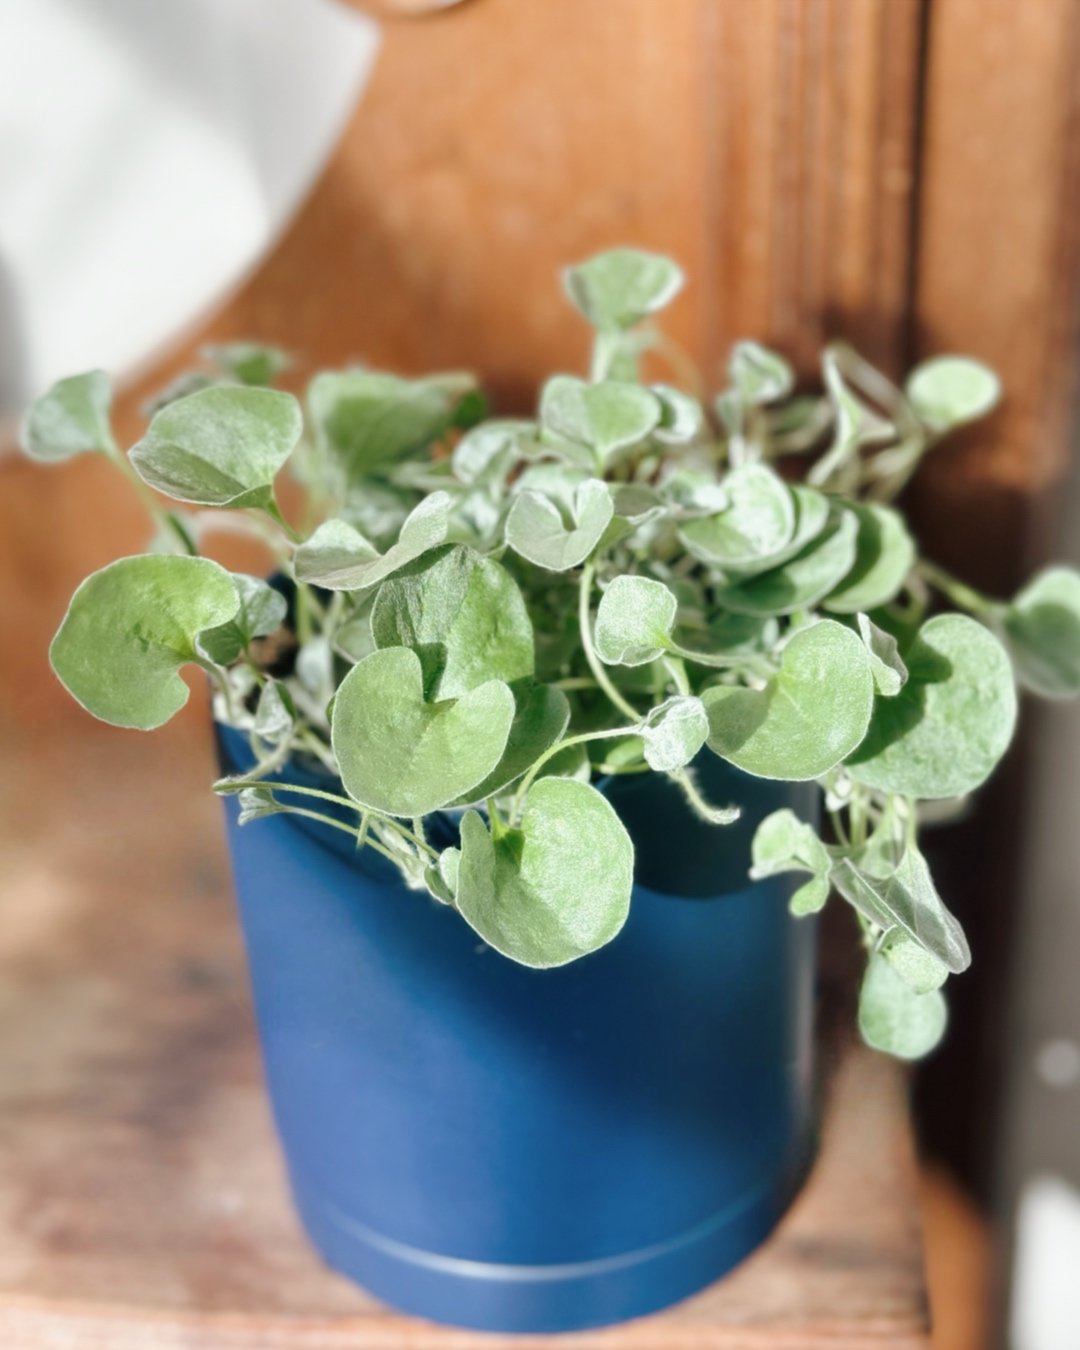 One word: WHIMSICAL.💙✨
DICHONDRA SILVER FALLS is a favourite at Harper&rsquo;s. It is so ENCHANTING. This ICONIC trailer can be seen in our annual planters and hanging baskets. Do you know you can also grow these SILVER FALLS INDOORS?
Be sure to kee